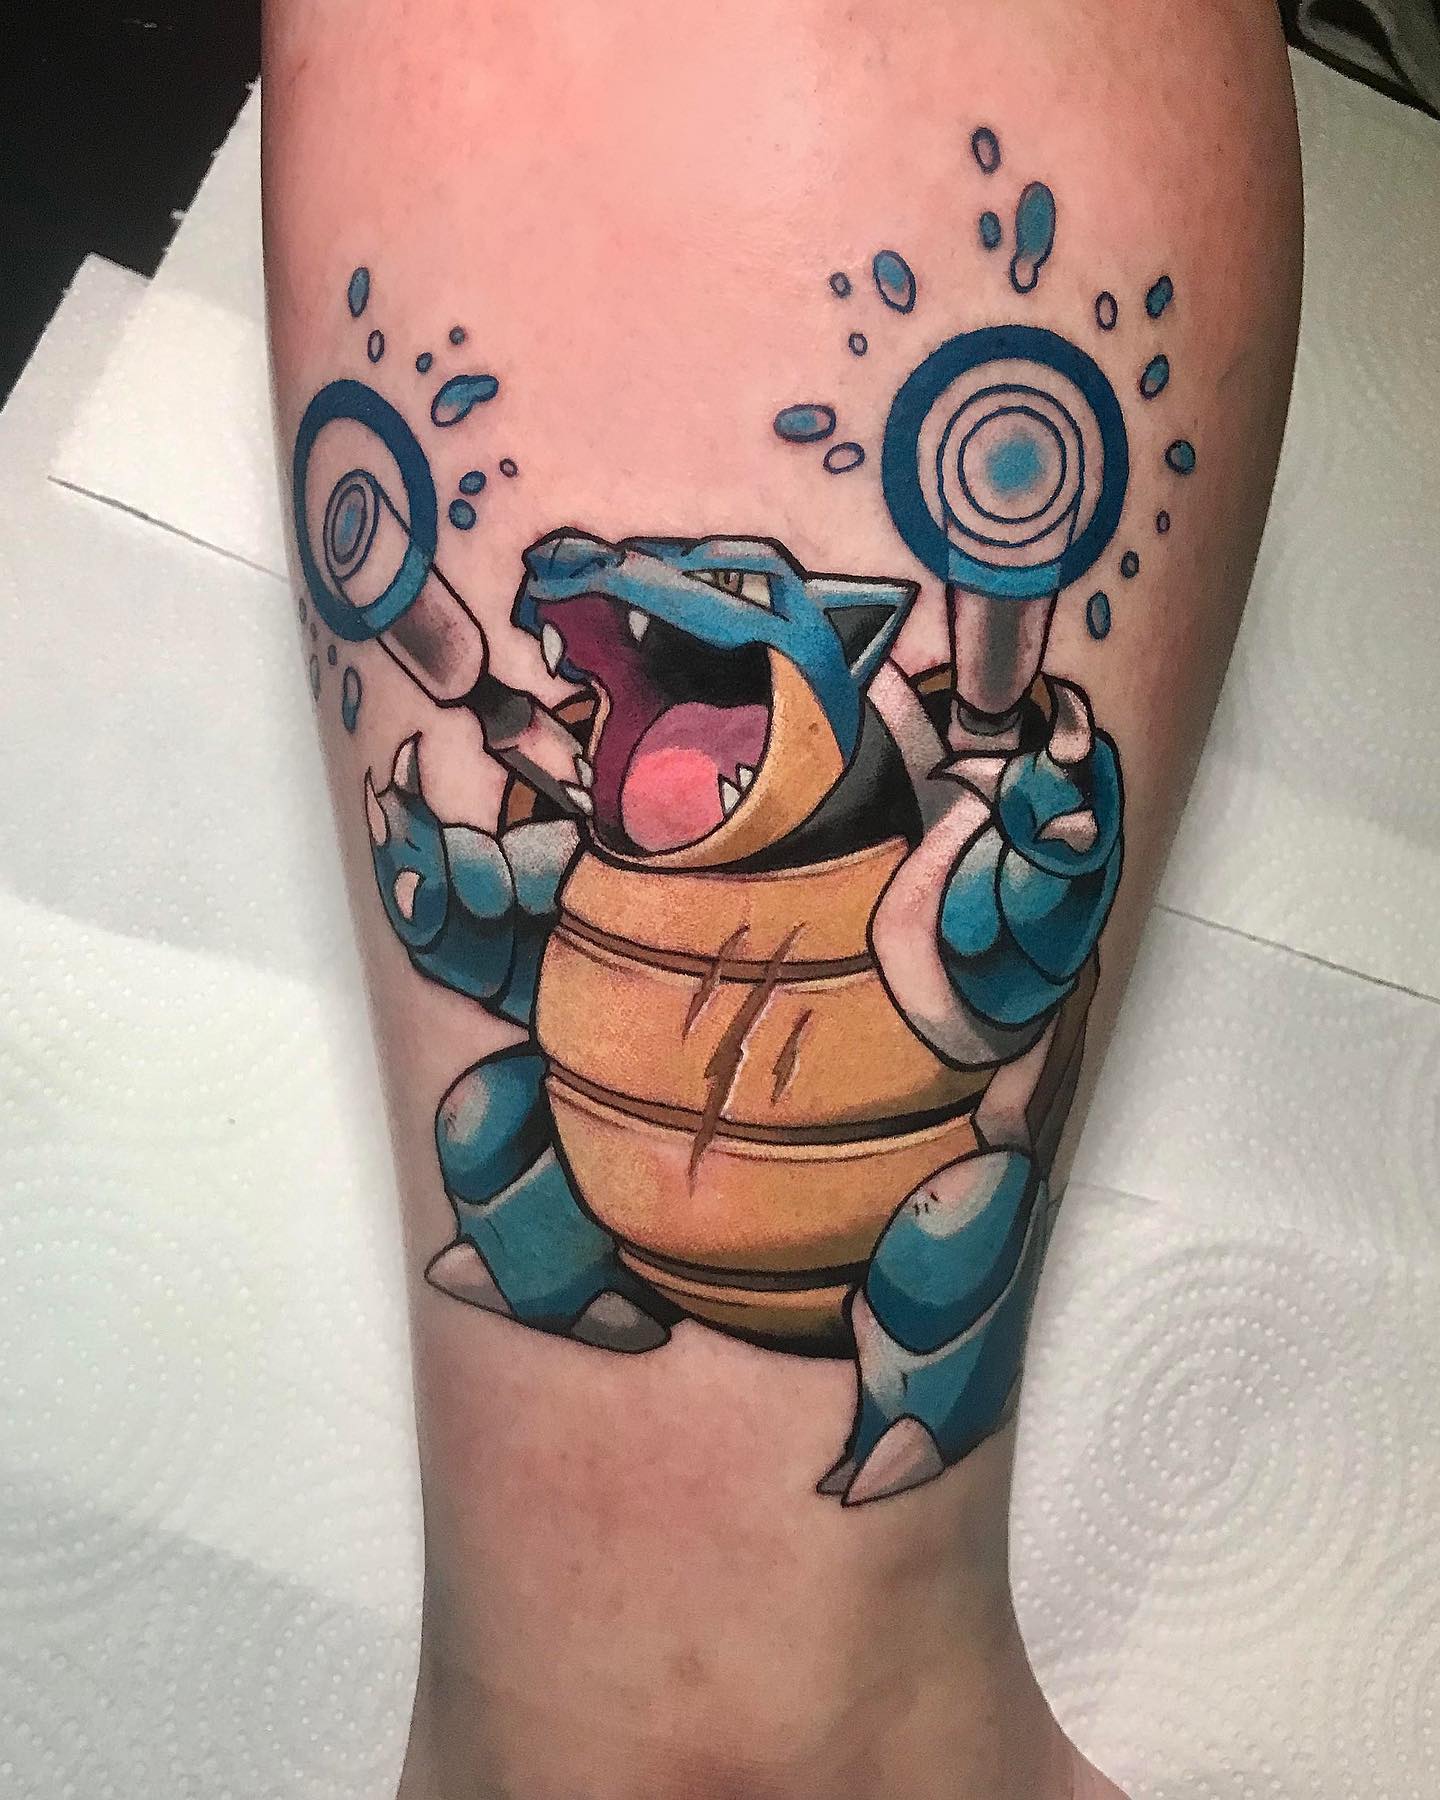 Many people choose to get a tattoo of Blastoise as a way to pay homage to their favorite Pokemon, or because they like how it looks on other people's bodies. Why don't you get a tortoise-like creature with a shell on its back?